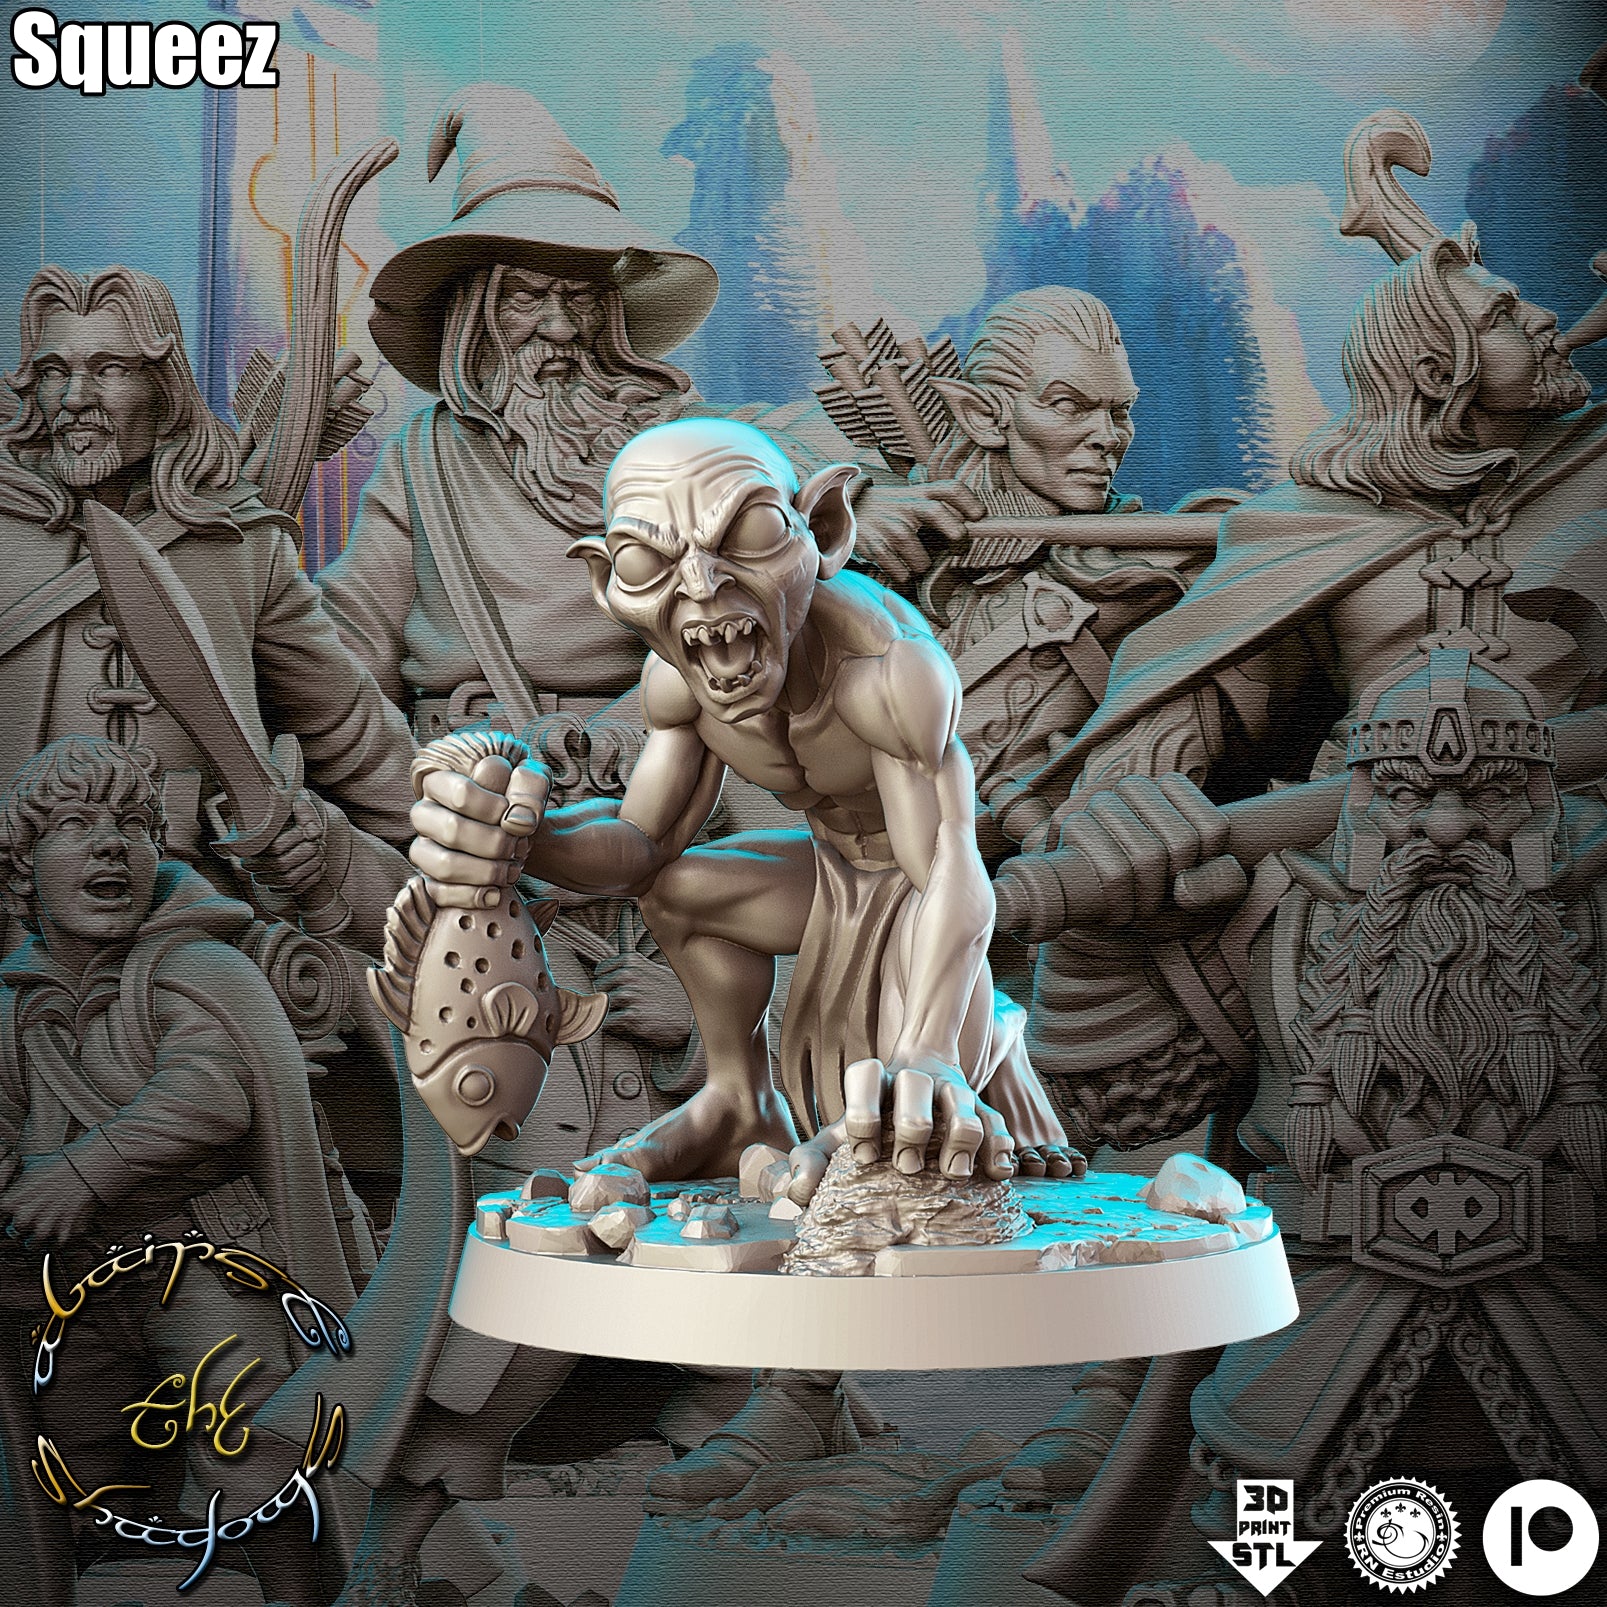 Squeez - Against the Shadows - Green Wildling Miniatures SPECIAL ORDER